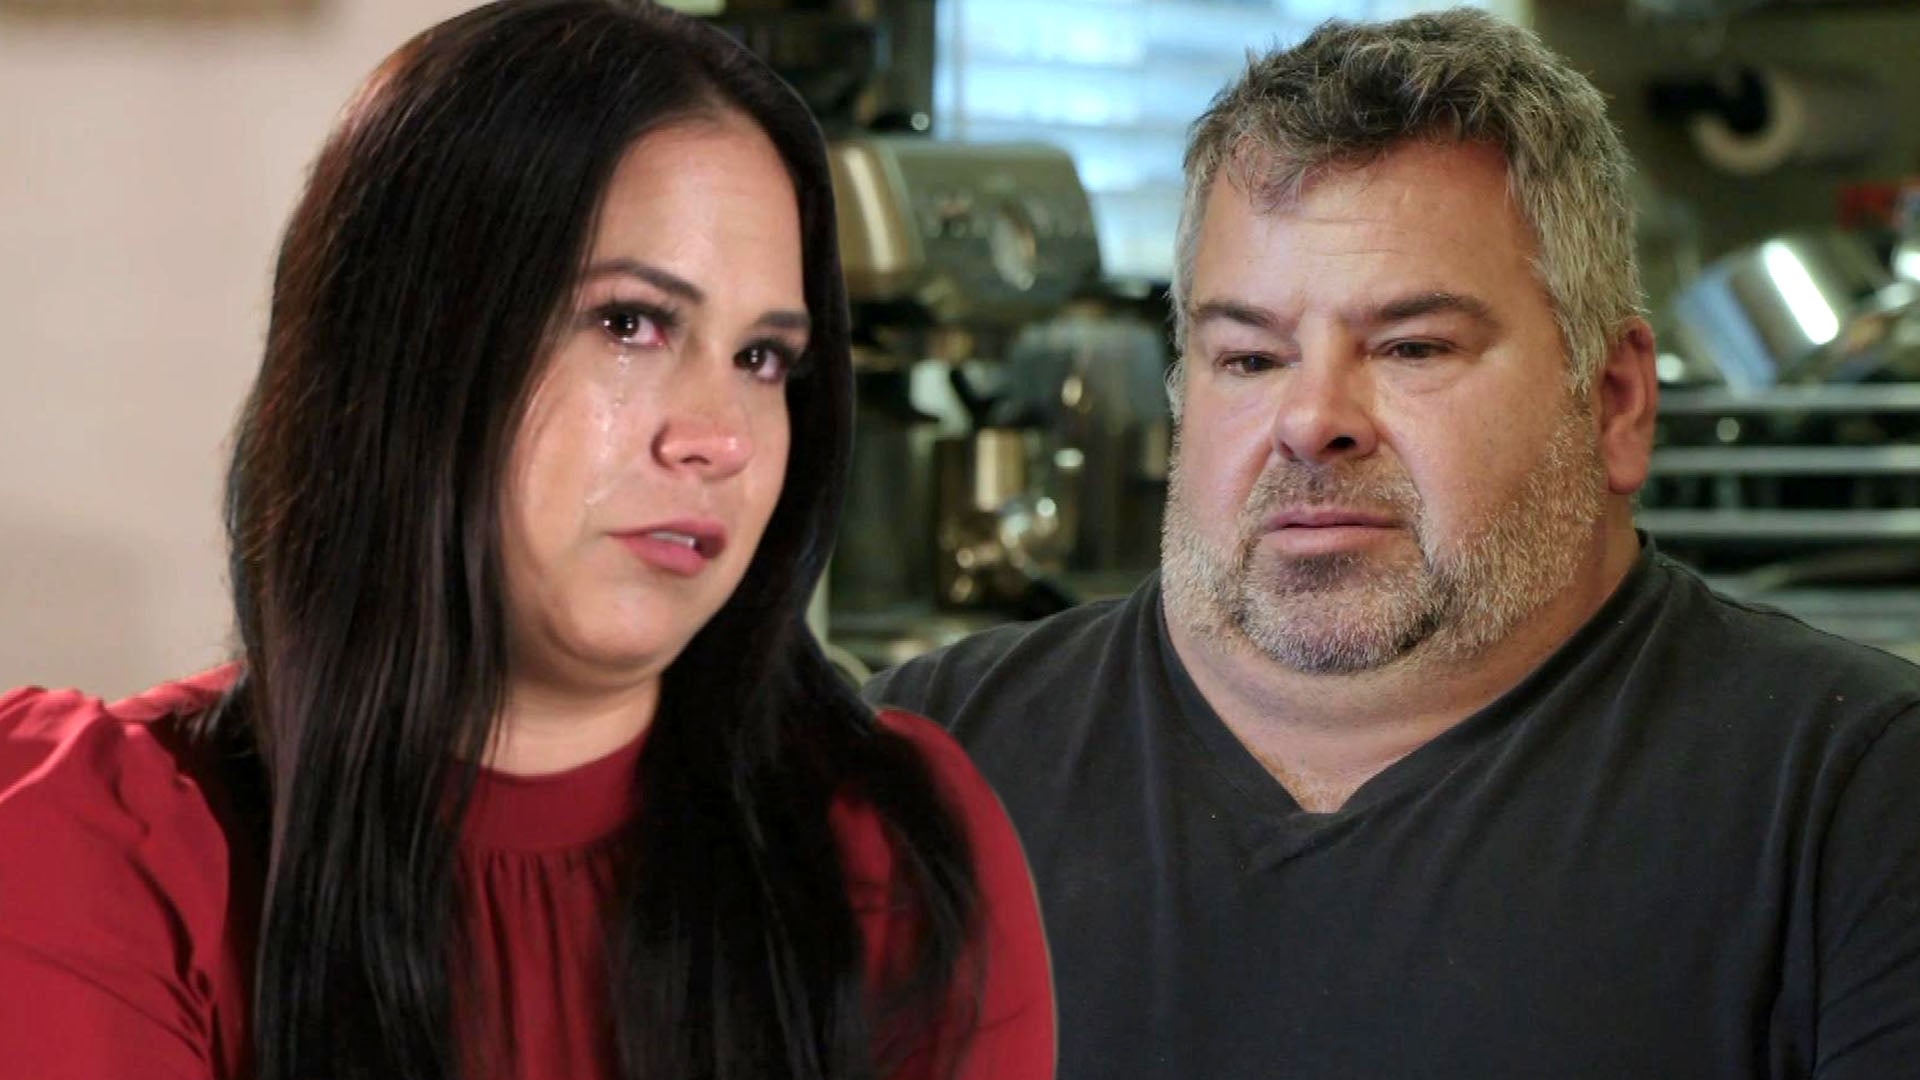 '90 Day Fiancé: Liz Reacts After Big Ed Tells Her He's Not Ready to Marry Her (Exclusive)